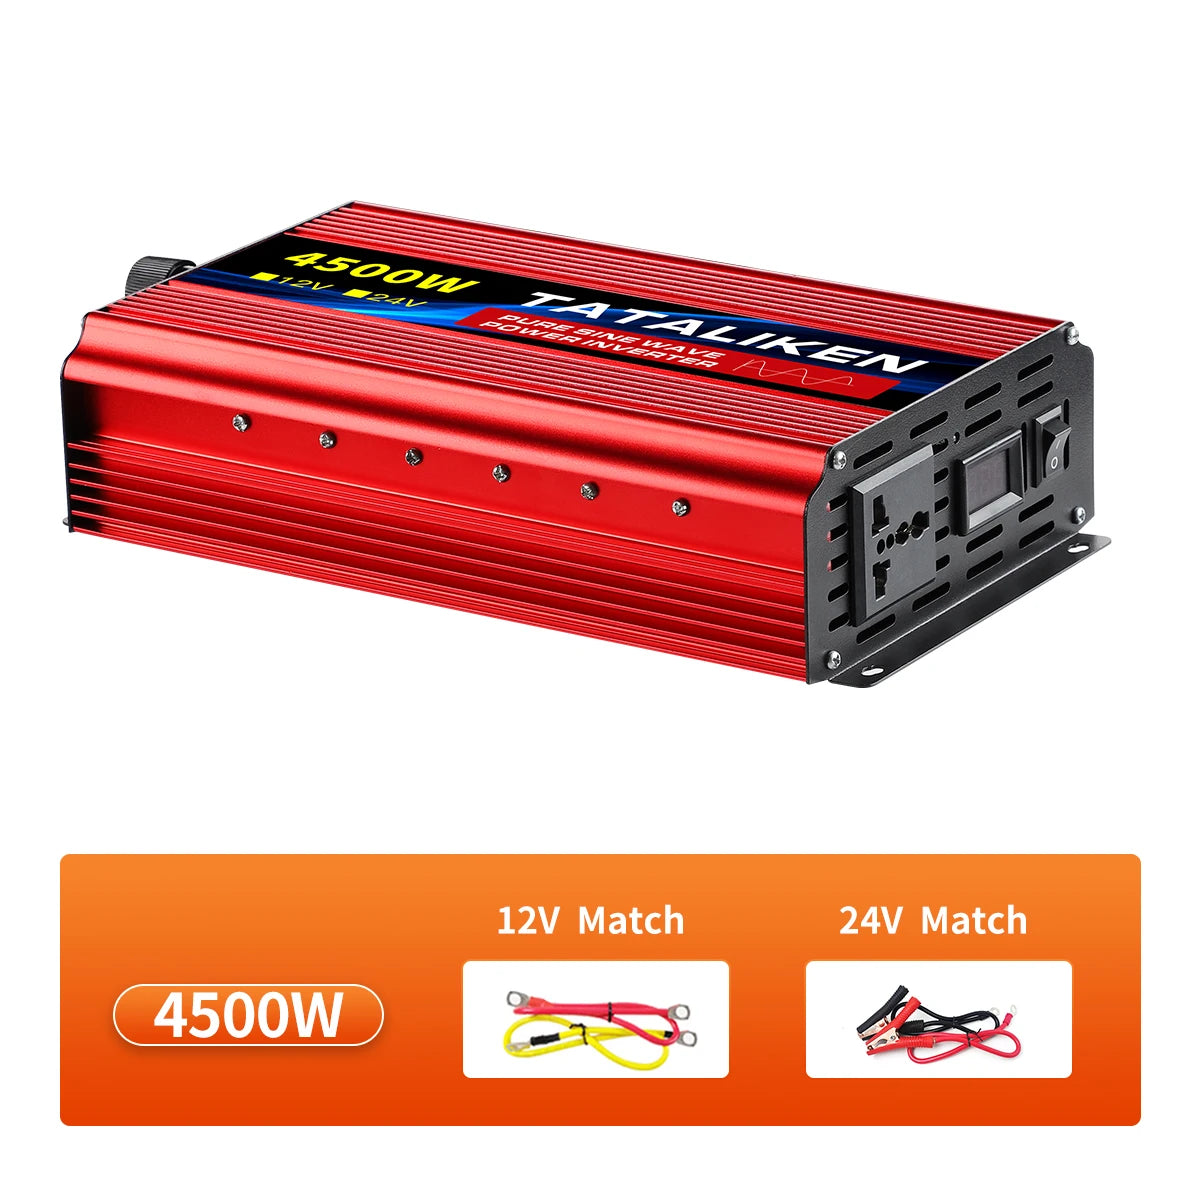 Tataliken DC/AC Inverter Specifications, Mainland China, Output Power 1600-5000W